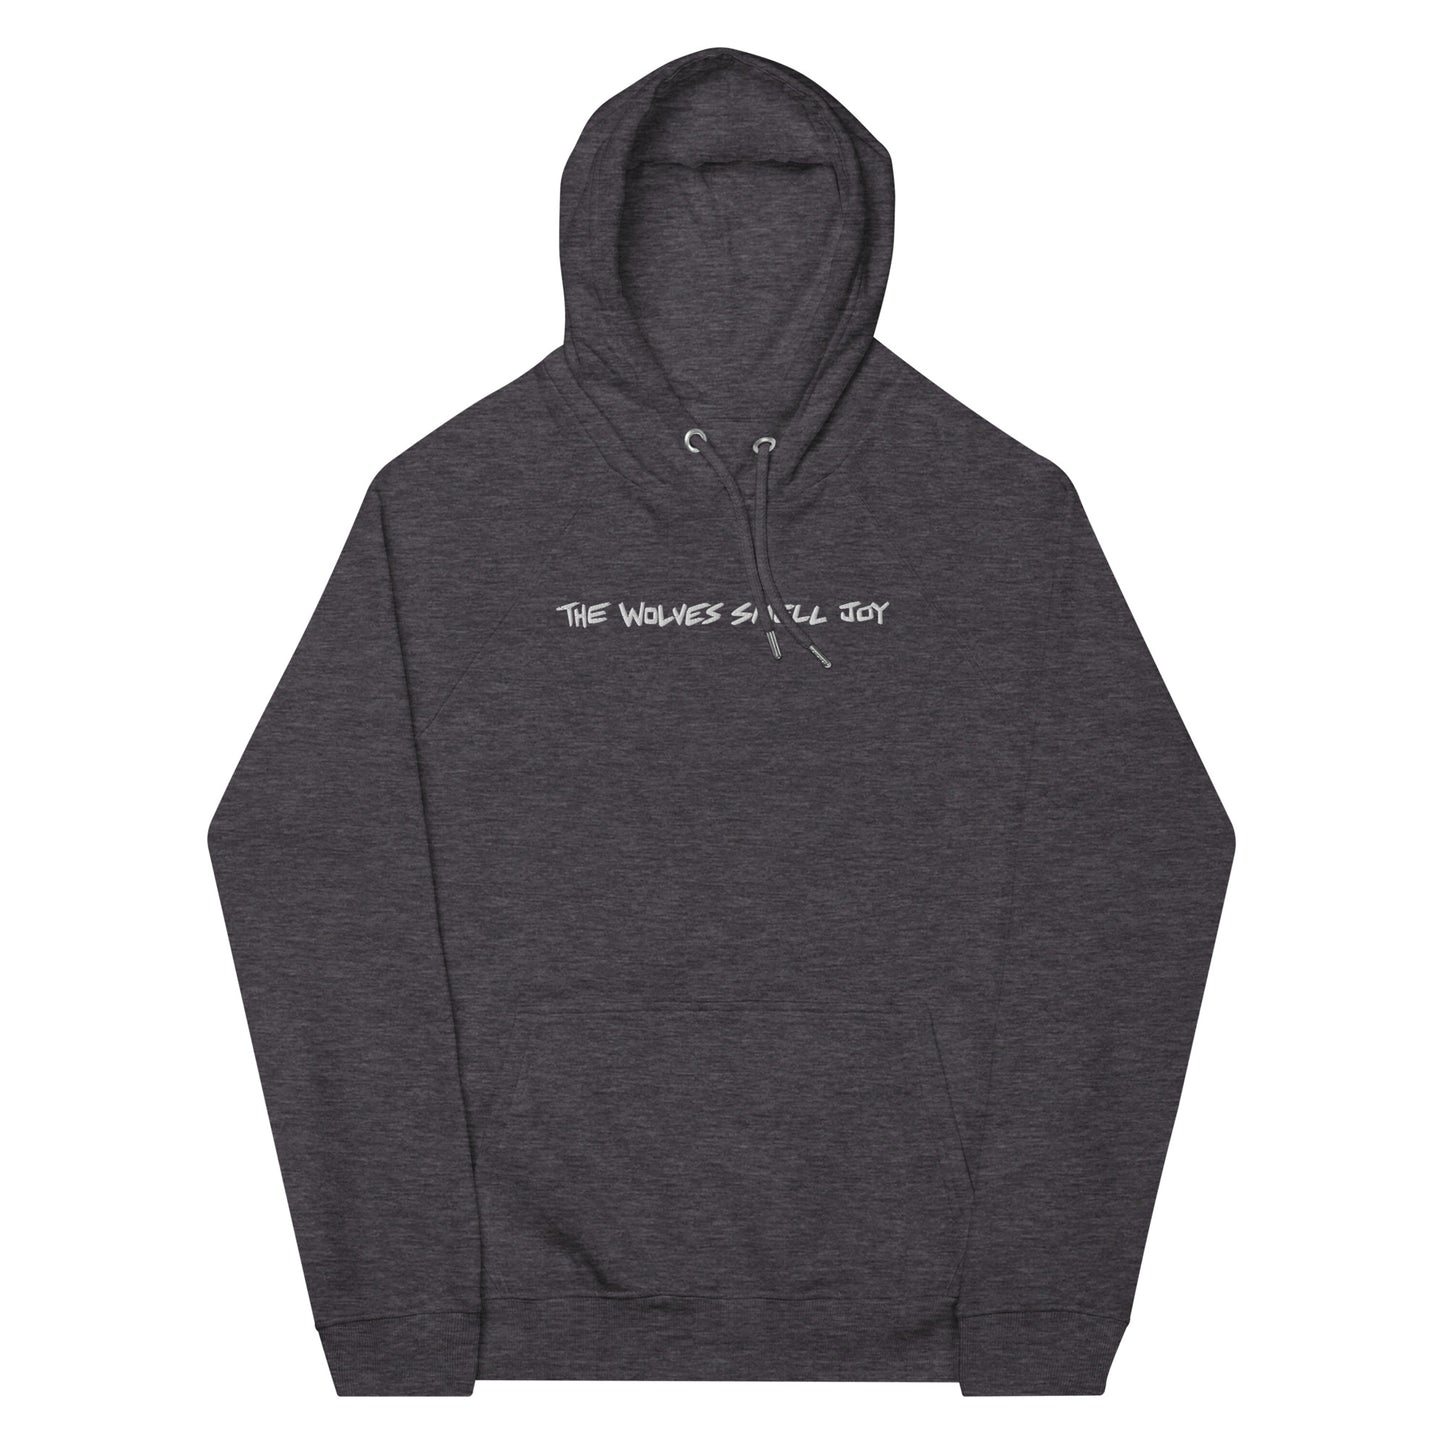 The Wolves Smell Joy TrackList Hoodie